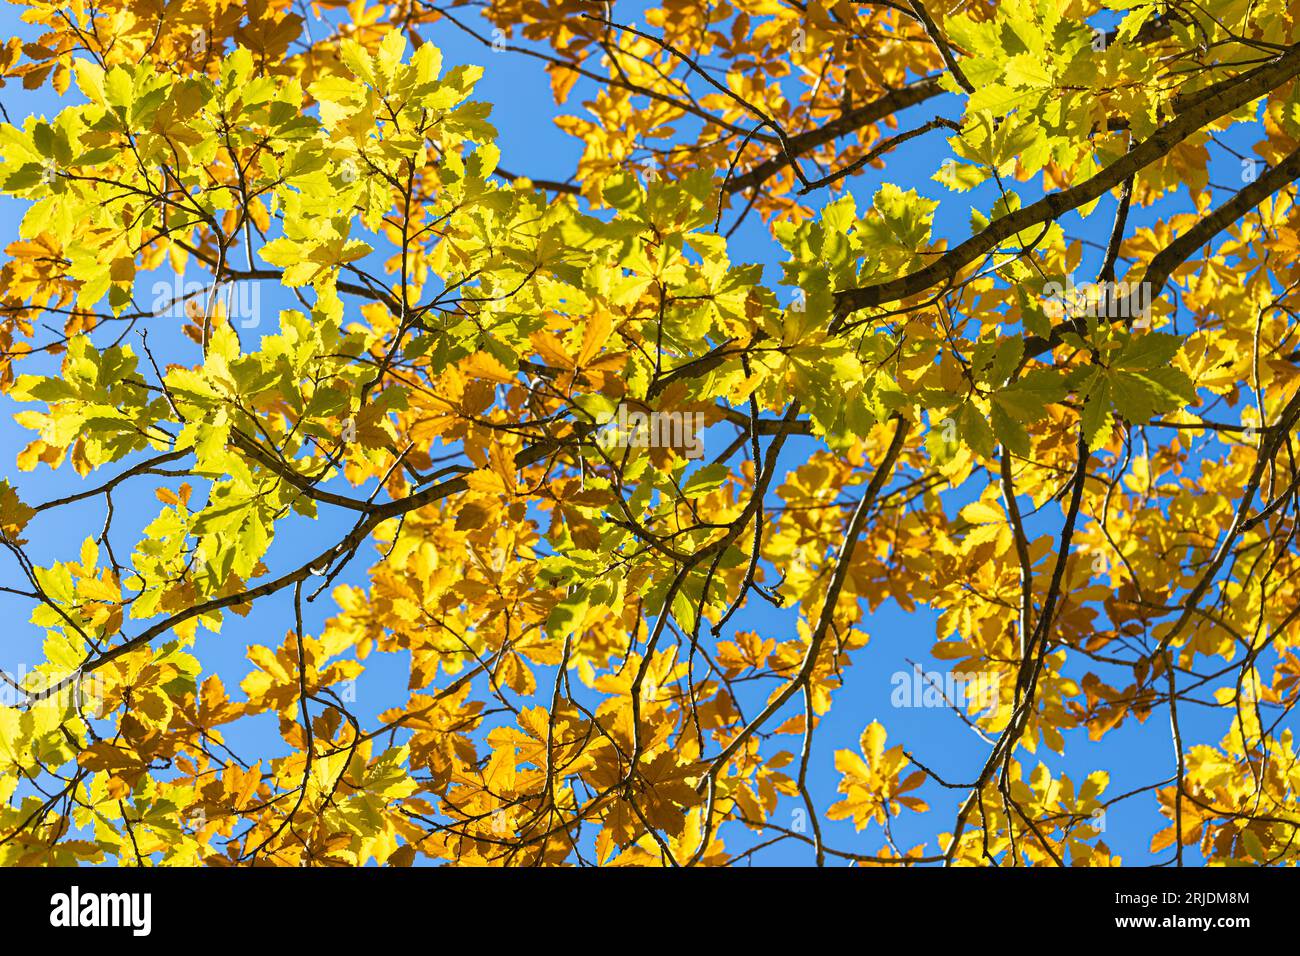 Branches of oak tree with fall yellow gold leaves on blue sky background. Autumn background or wallpaper with soft focus. Beauty in nature. Horizontal Stock Photo